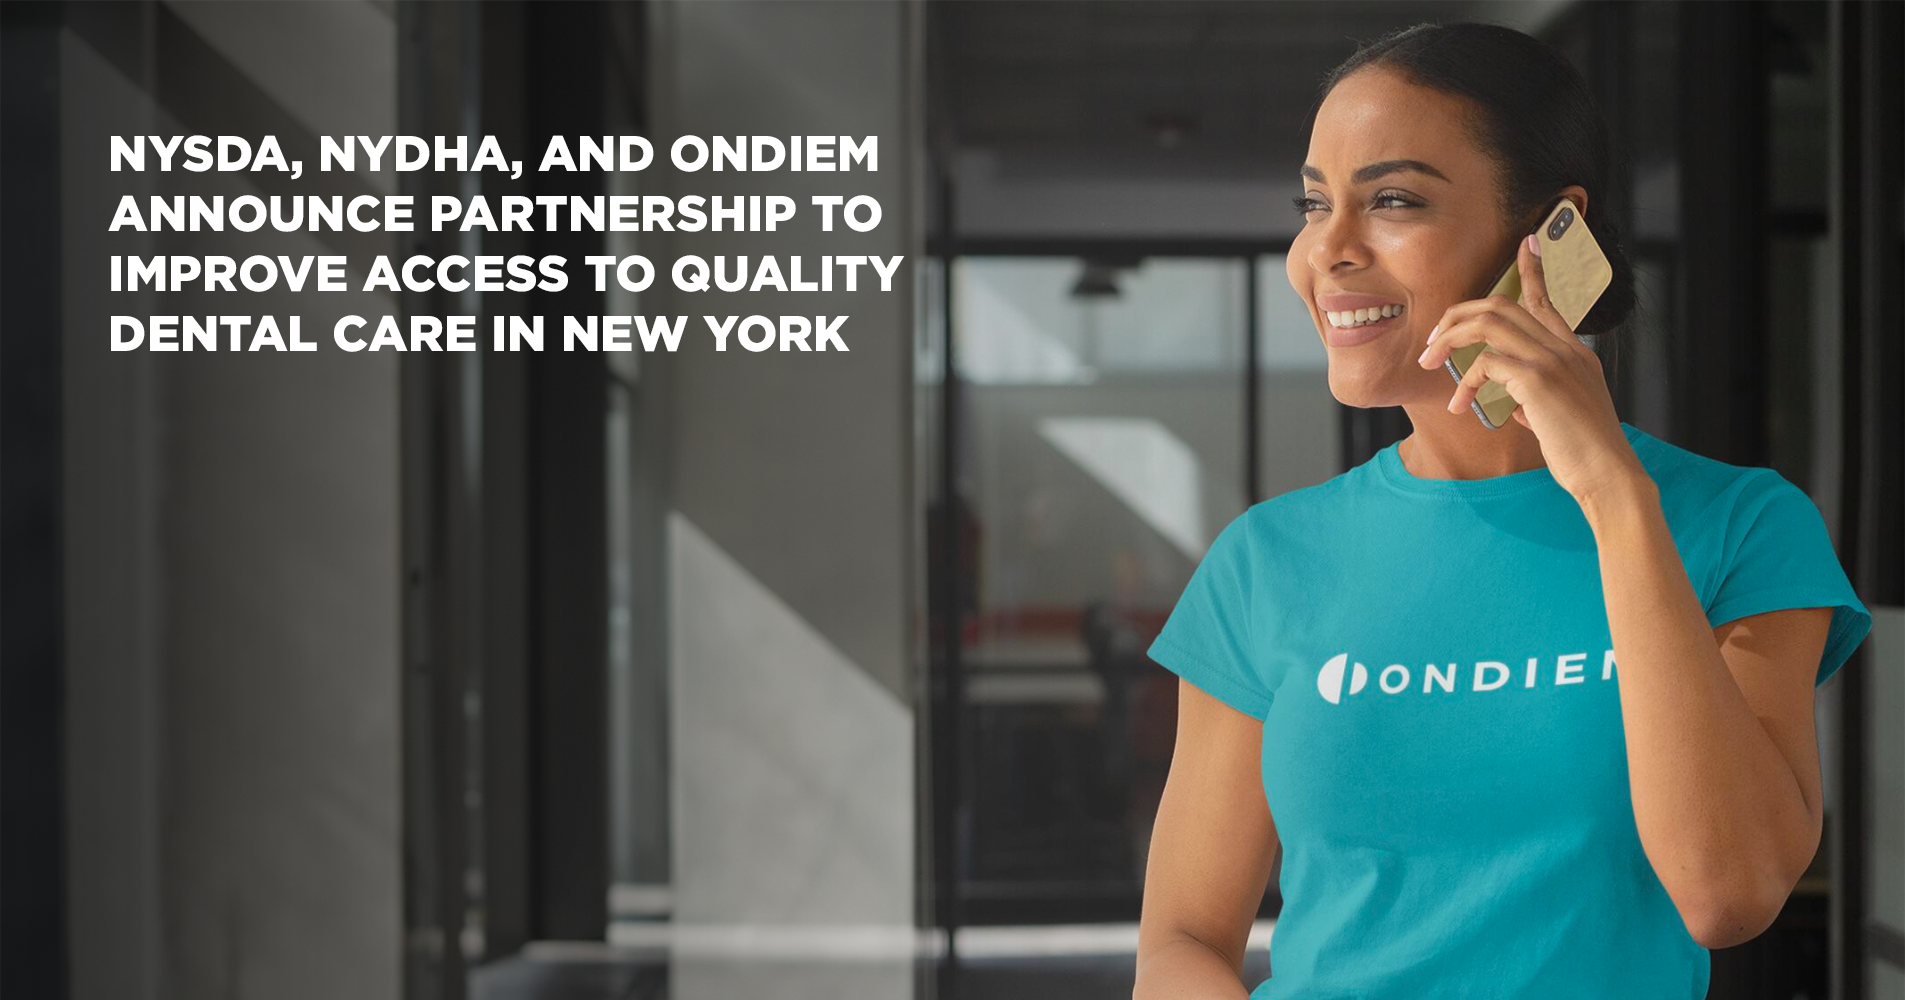 NYSDA, NYDHA, and onDiem announce partnership to improve access to quality dental care in New York